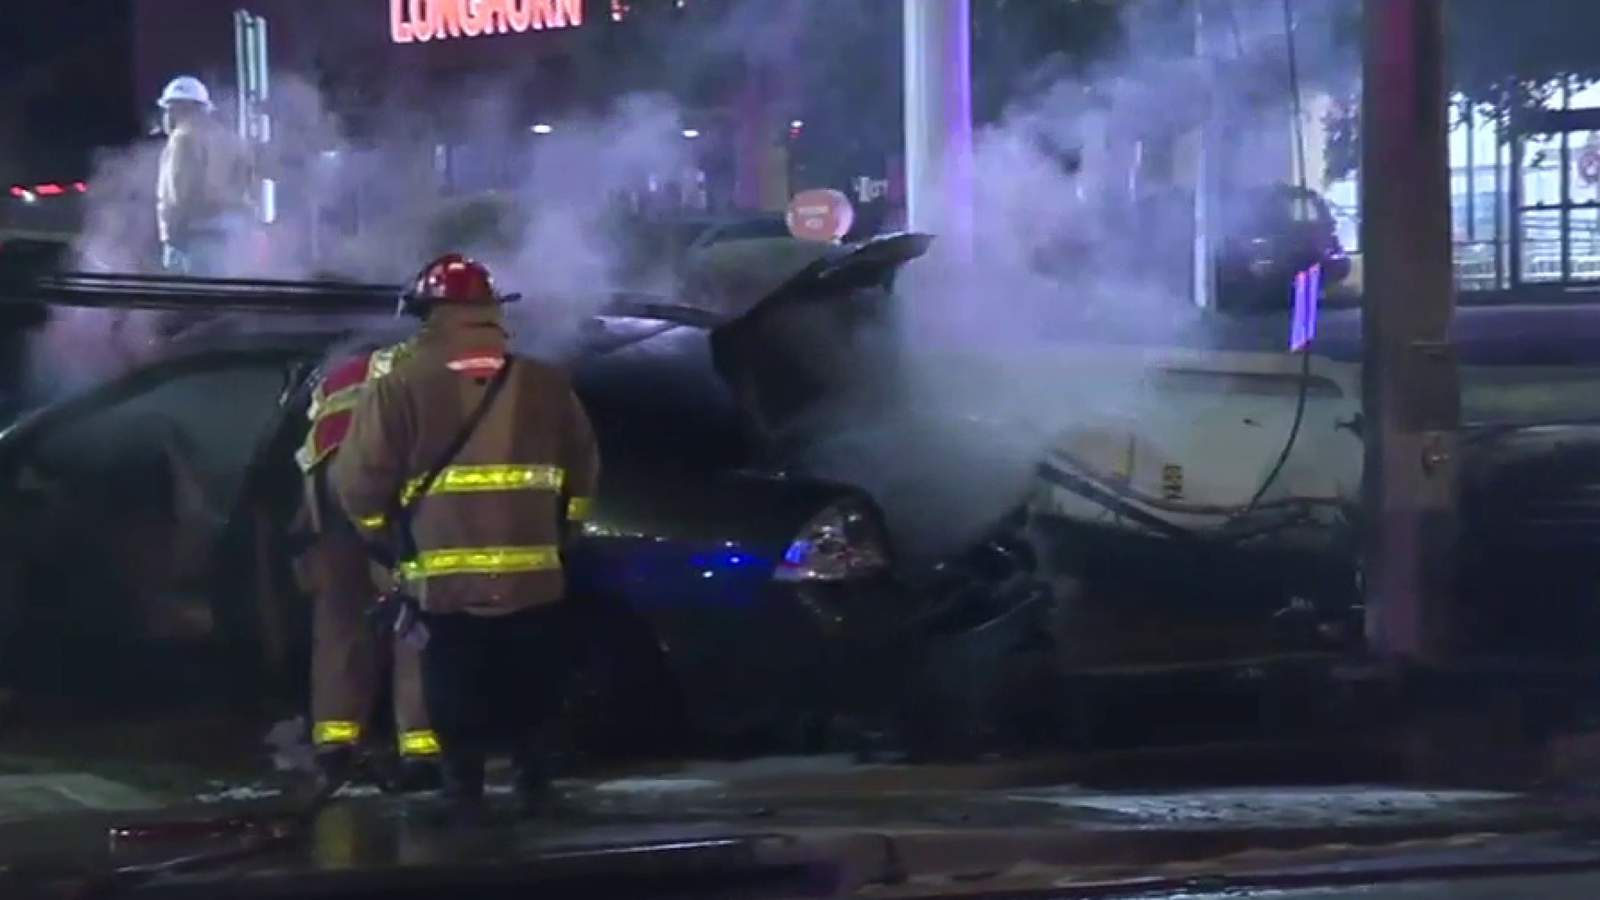 Woman’s car catches fire after crashing into utility pole, police say